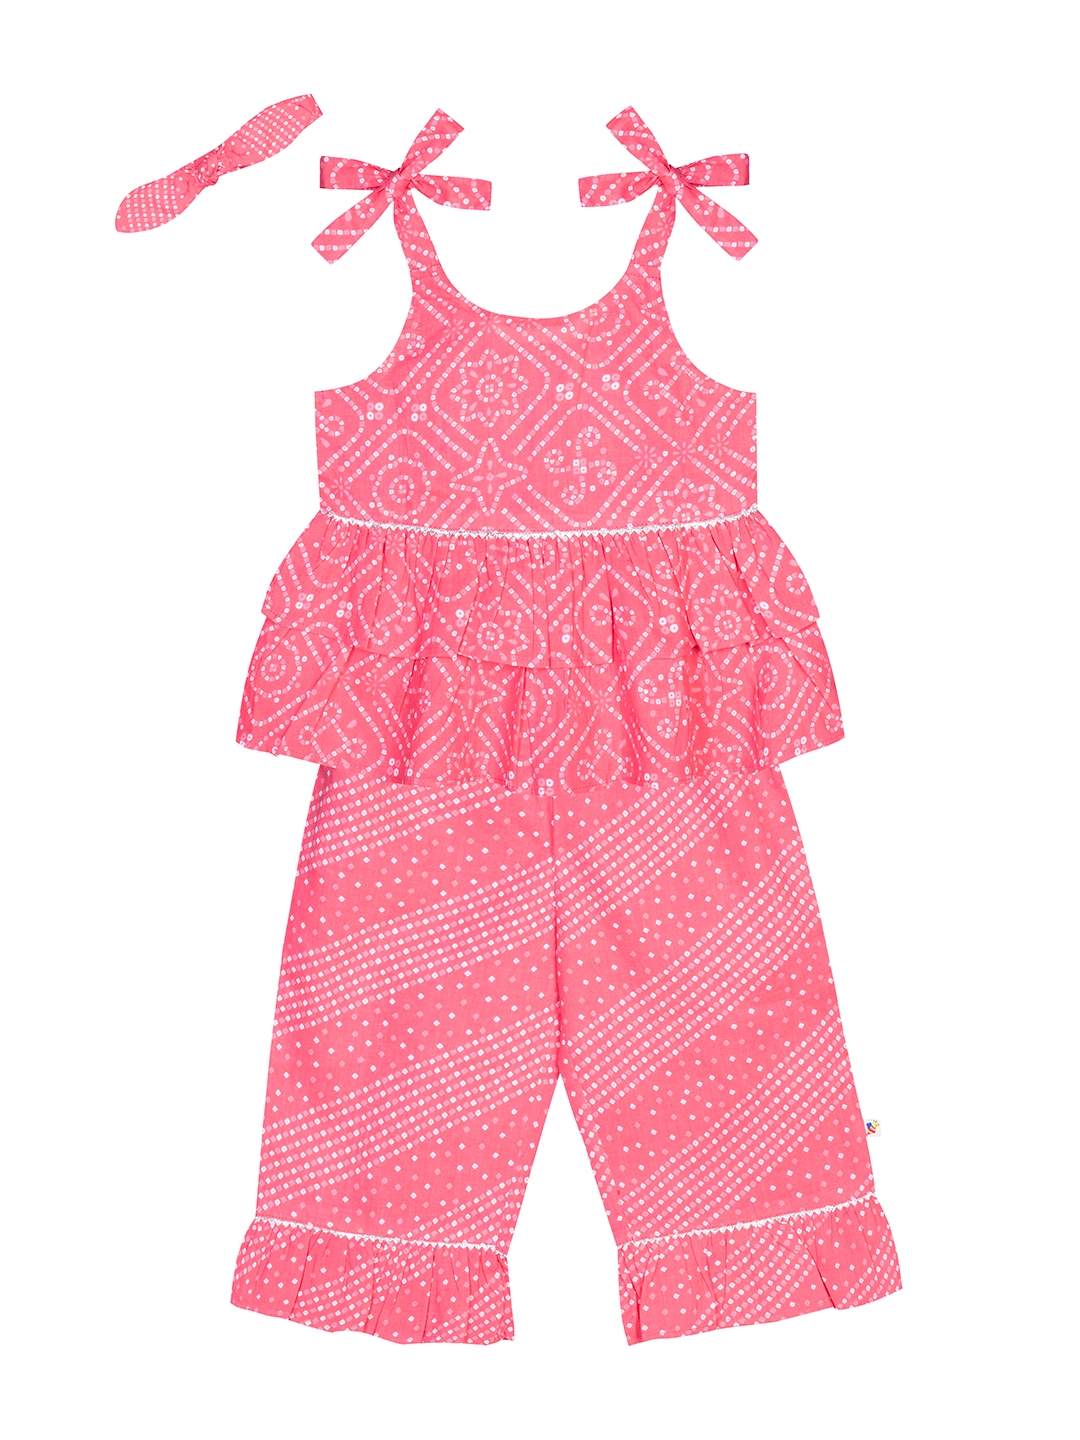 Budding Bees | Budding Bees Infants Cotton Pink Top-Pajama Set with Matching Hairband